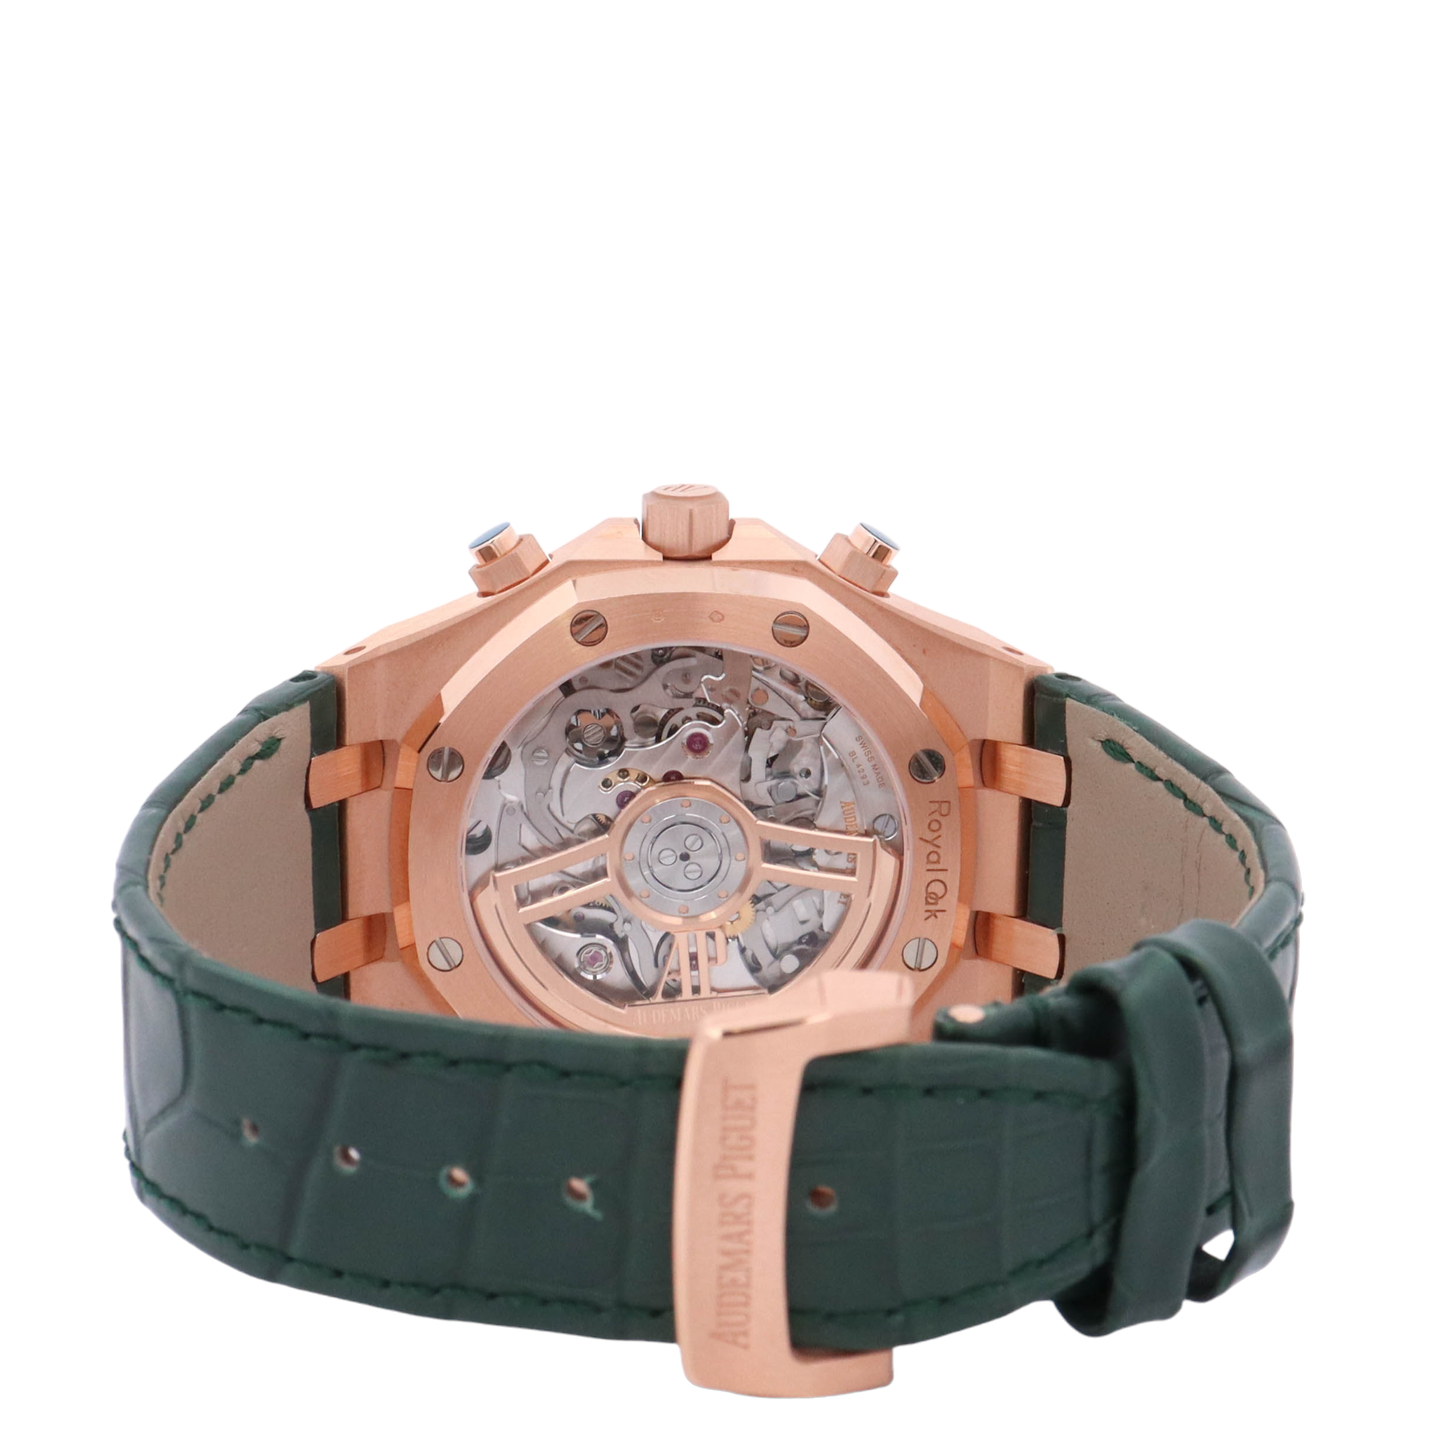 Audemars Piguet Royal Oak 41mm Rose Gold Green Chronograph Dial Watch Reference# 26240OR.OO.D404CR.02 - Happy Jewelers Fine Jewelry Lifetime Warranty